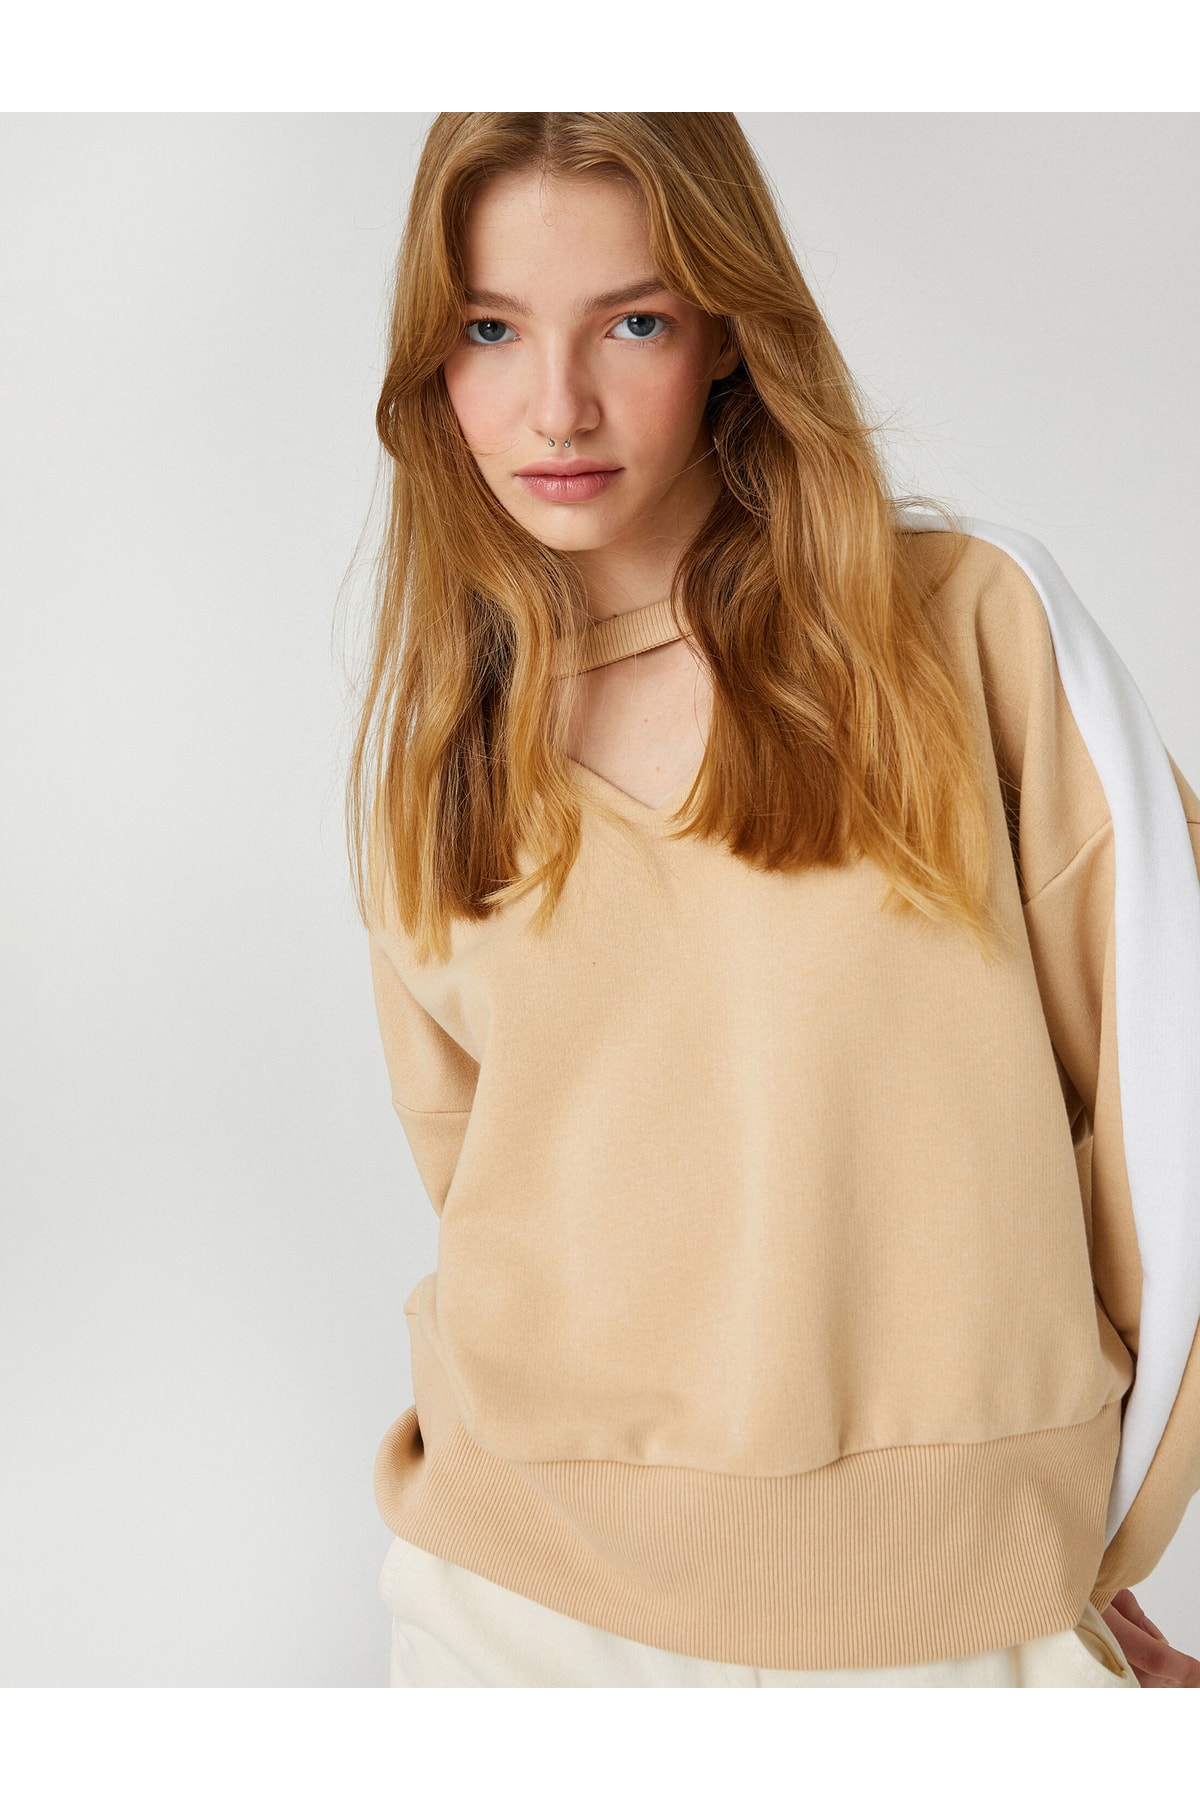 Koton Crewneck Sweatshirt with a relaxed fit, long sleeves and ribbed trim.